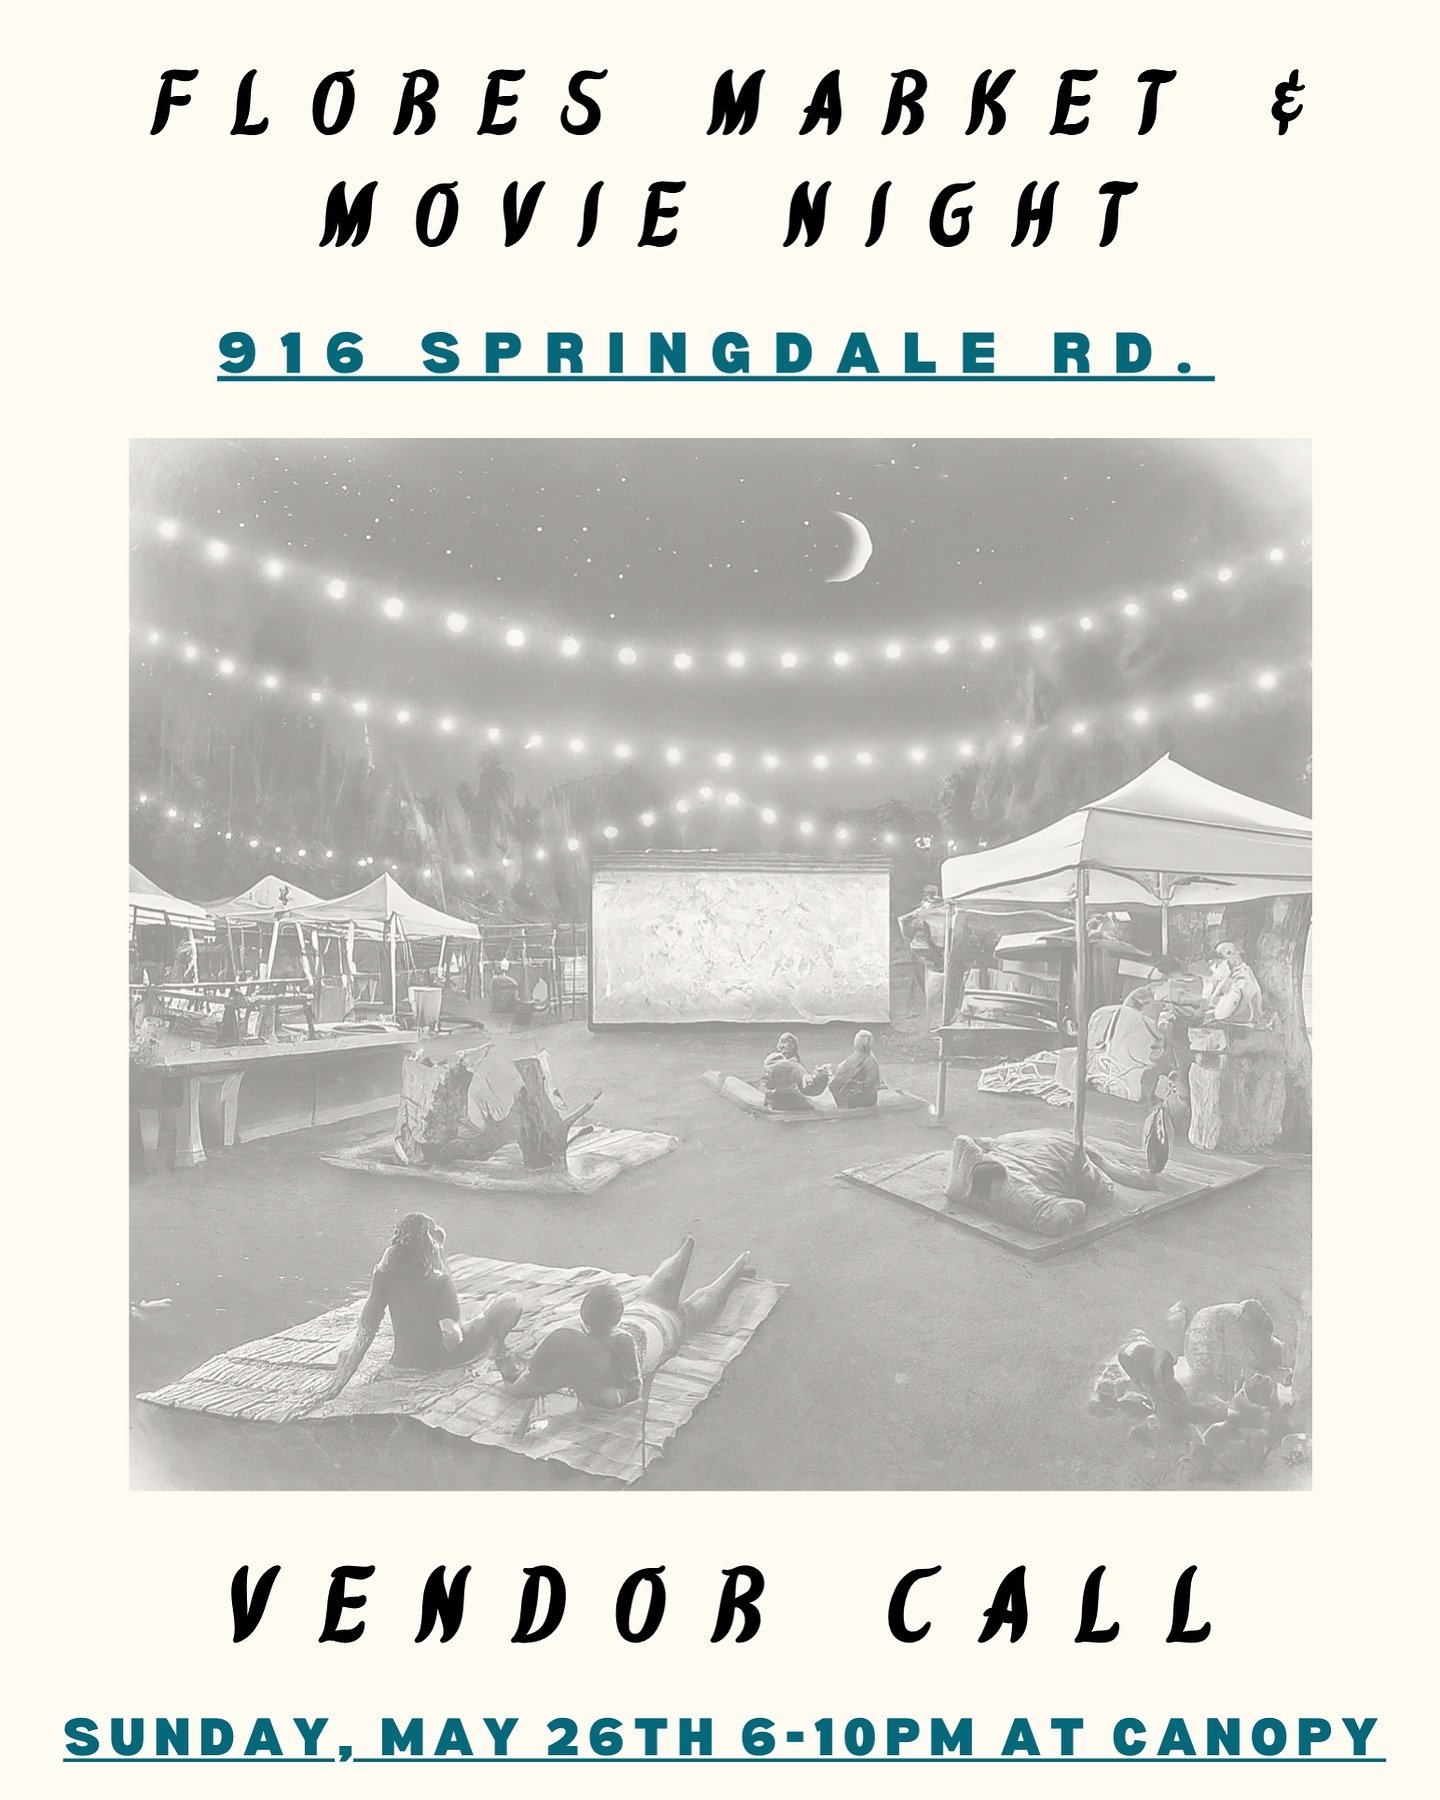 VENDOR CALL! ❤️ The last of Spring before we take a break for the summer ☀️ Link in bio to apply.

Sliding Scale Vendor Fees, Free Bar, Music from @frederico7music and solo acts from @bidibidibanda - Mini Bidi Banda 🌹 MAY 26TH 6-10PM 🌙 Movie Night 